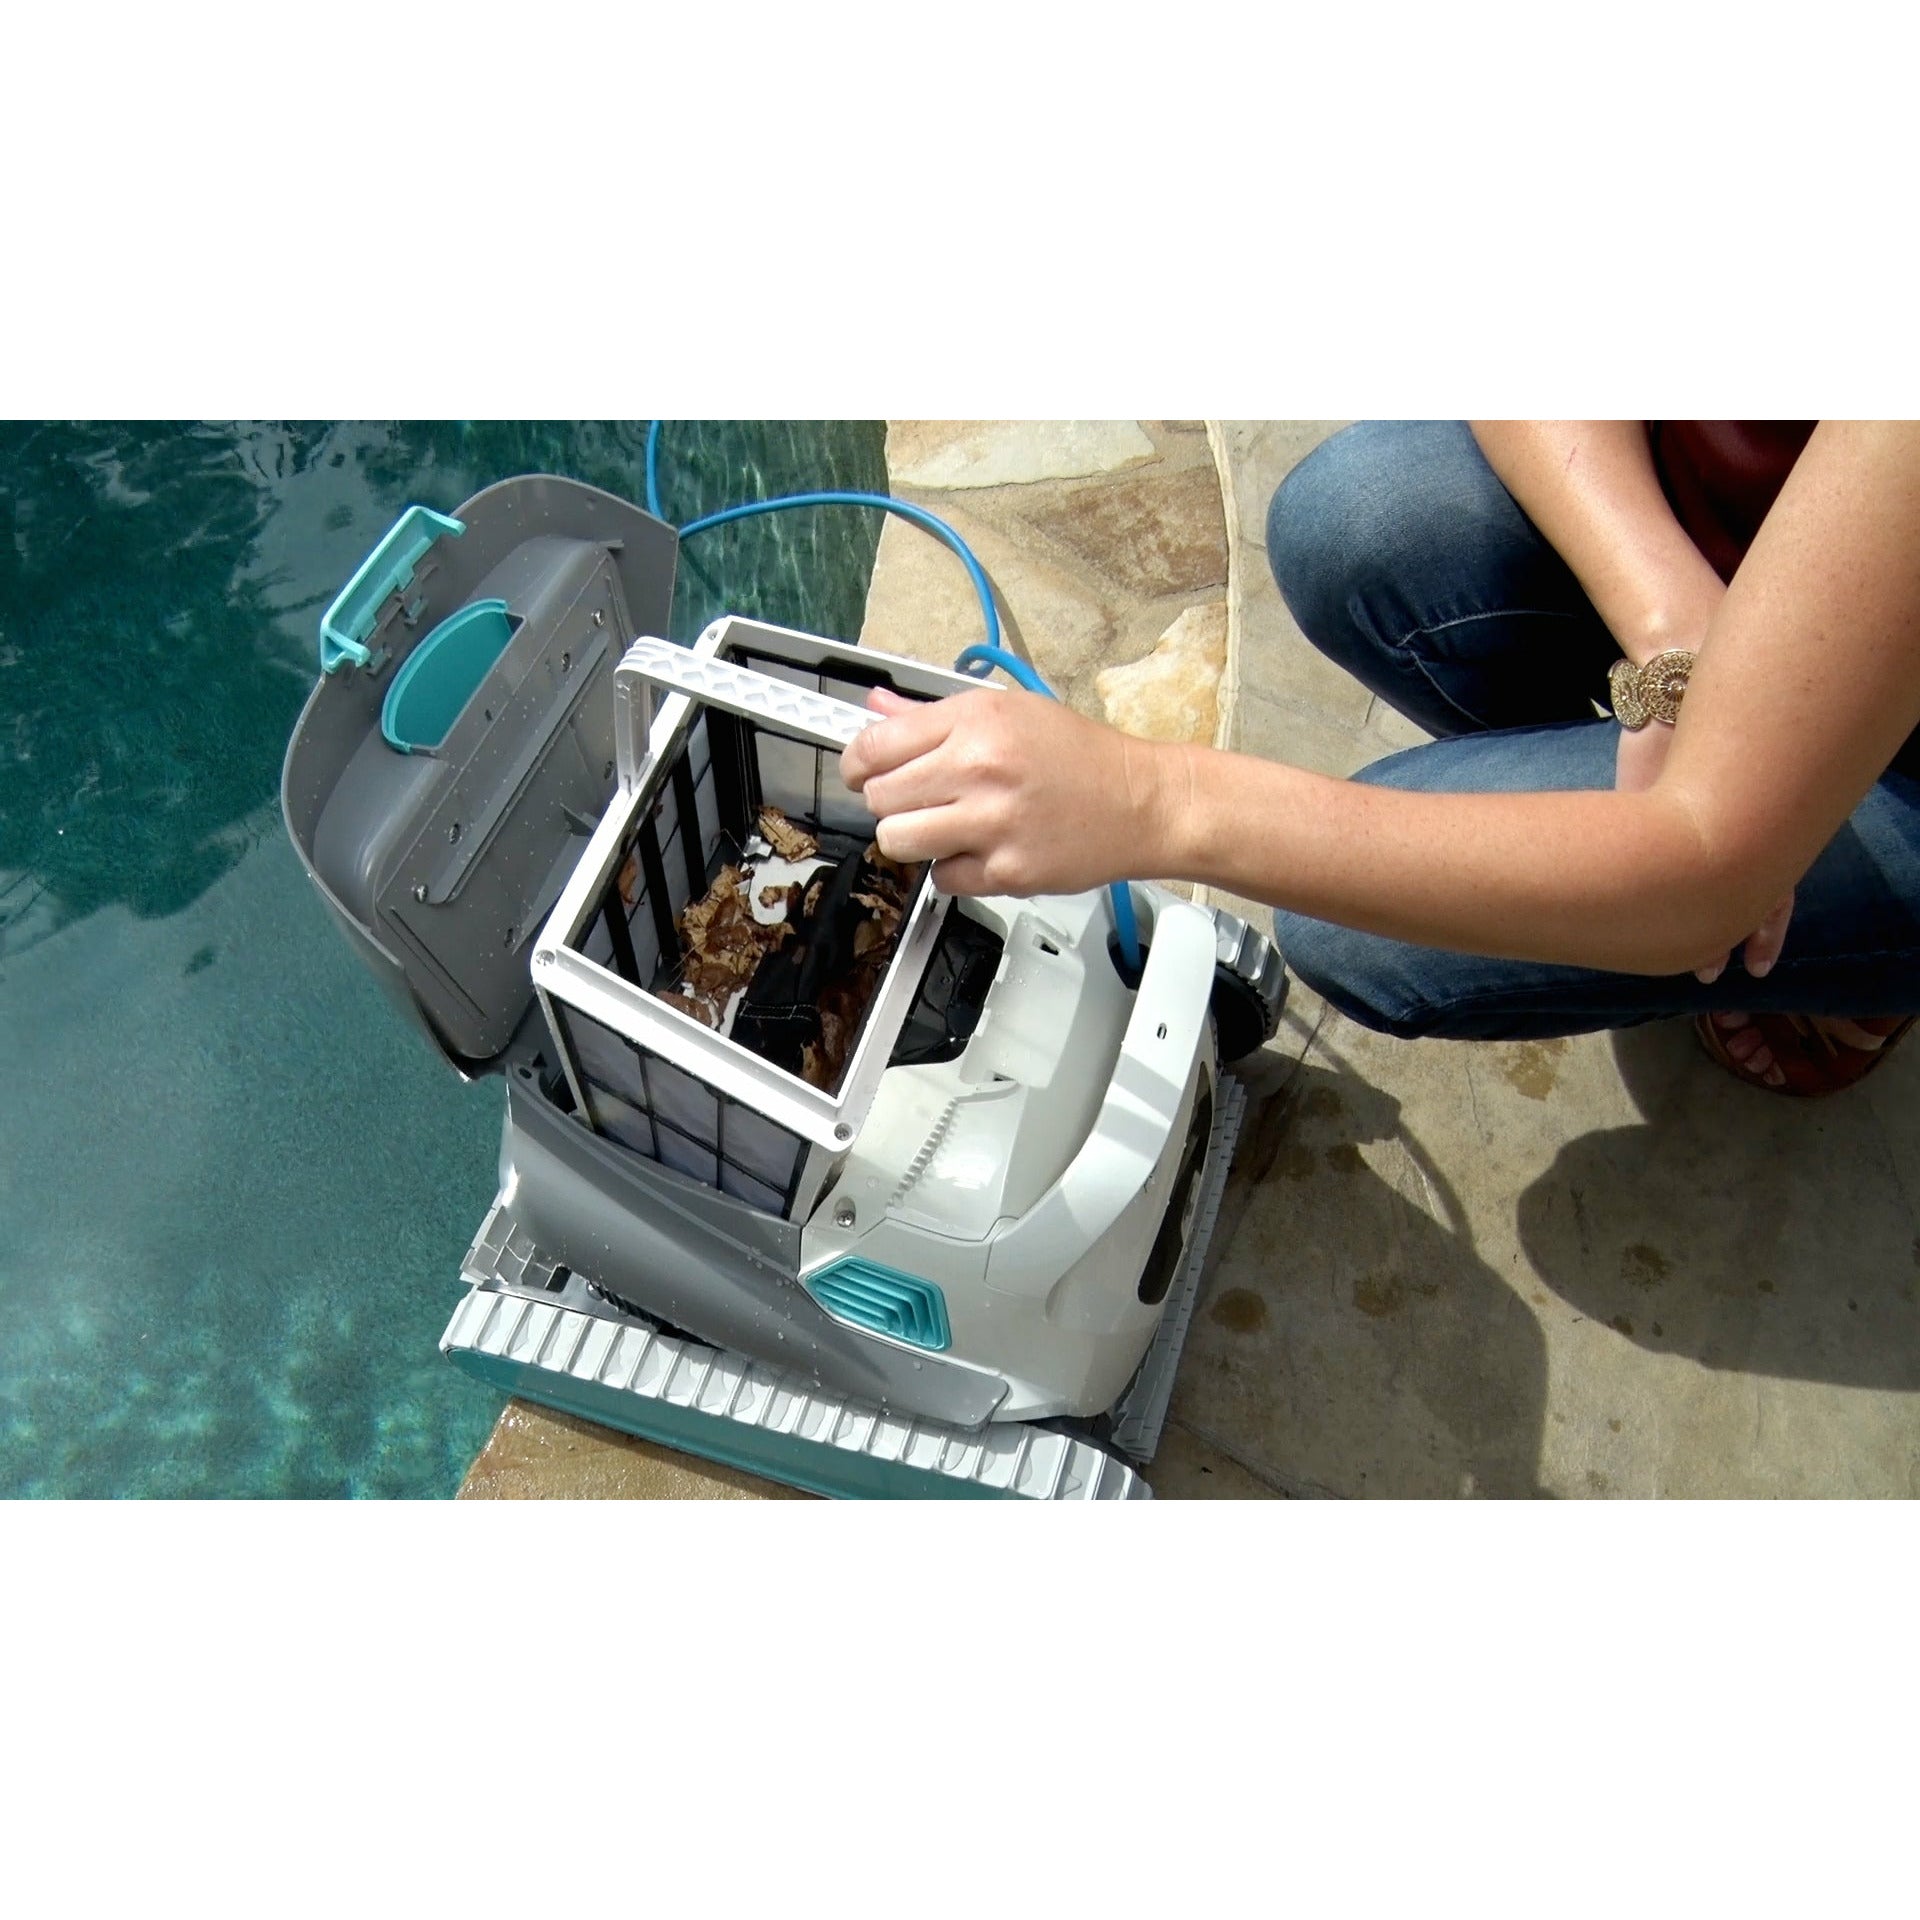 Maytronics Dolphin Active 30 Pool Cleaner